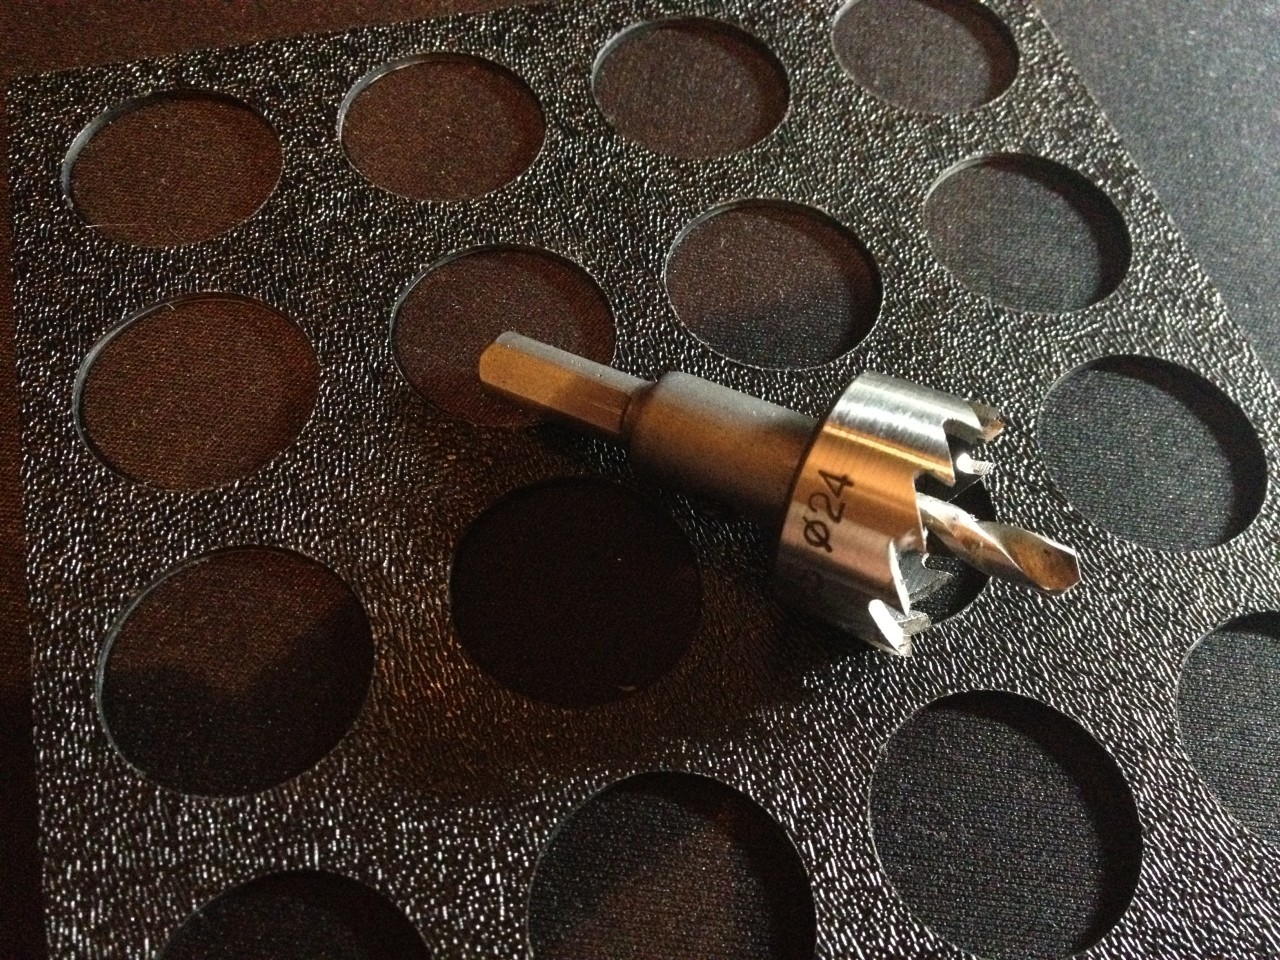 A drill bit I ordered for a few dollars on Amazon that is precisely the size of the arcade buttons.